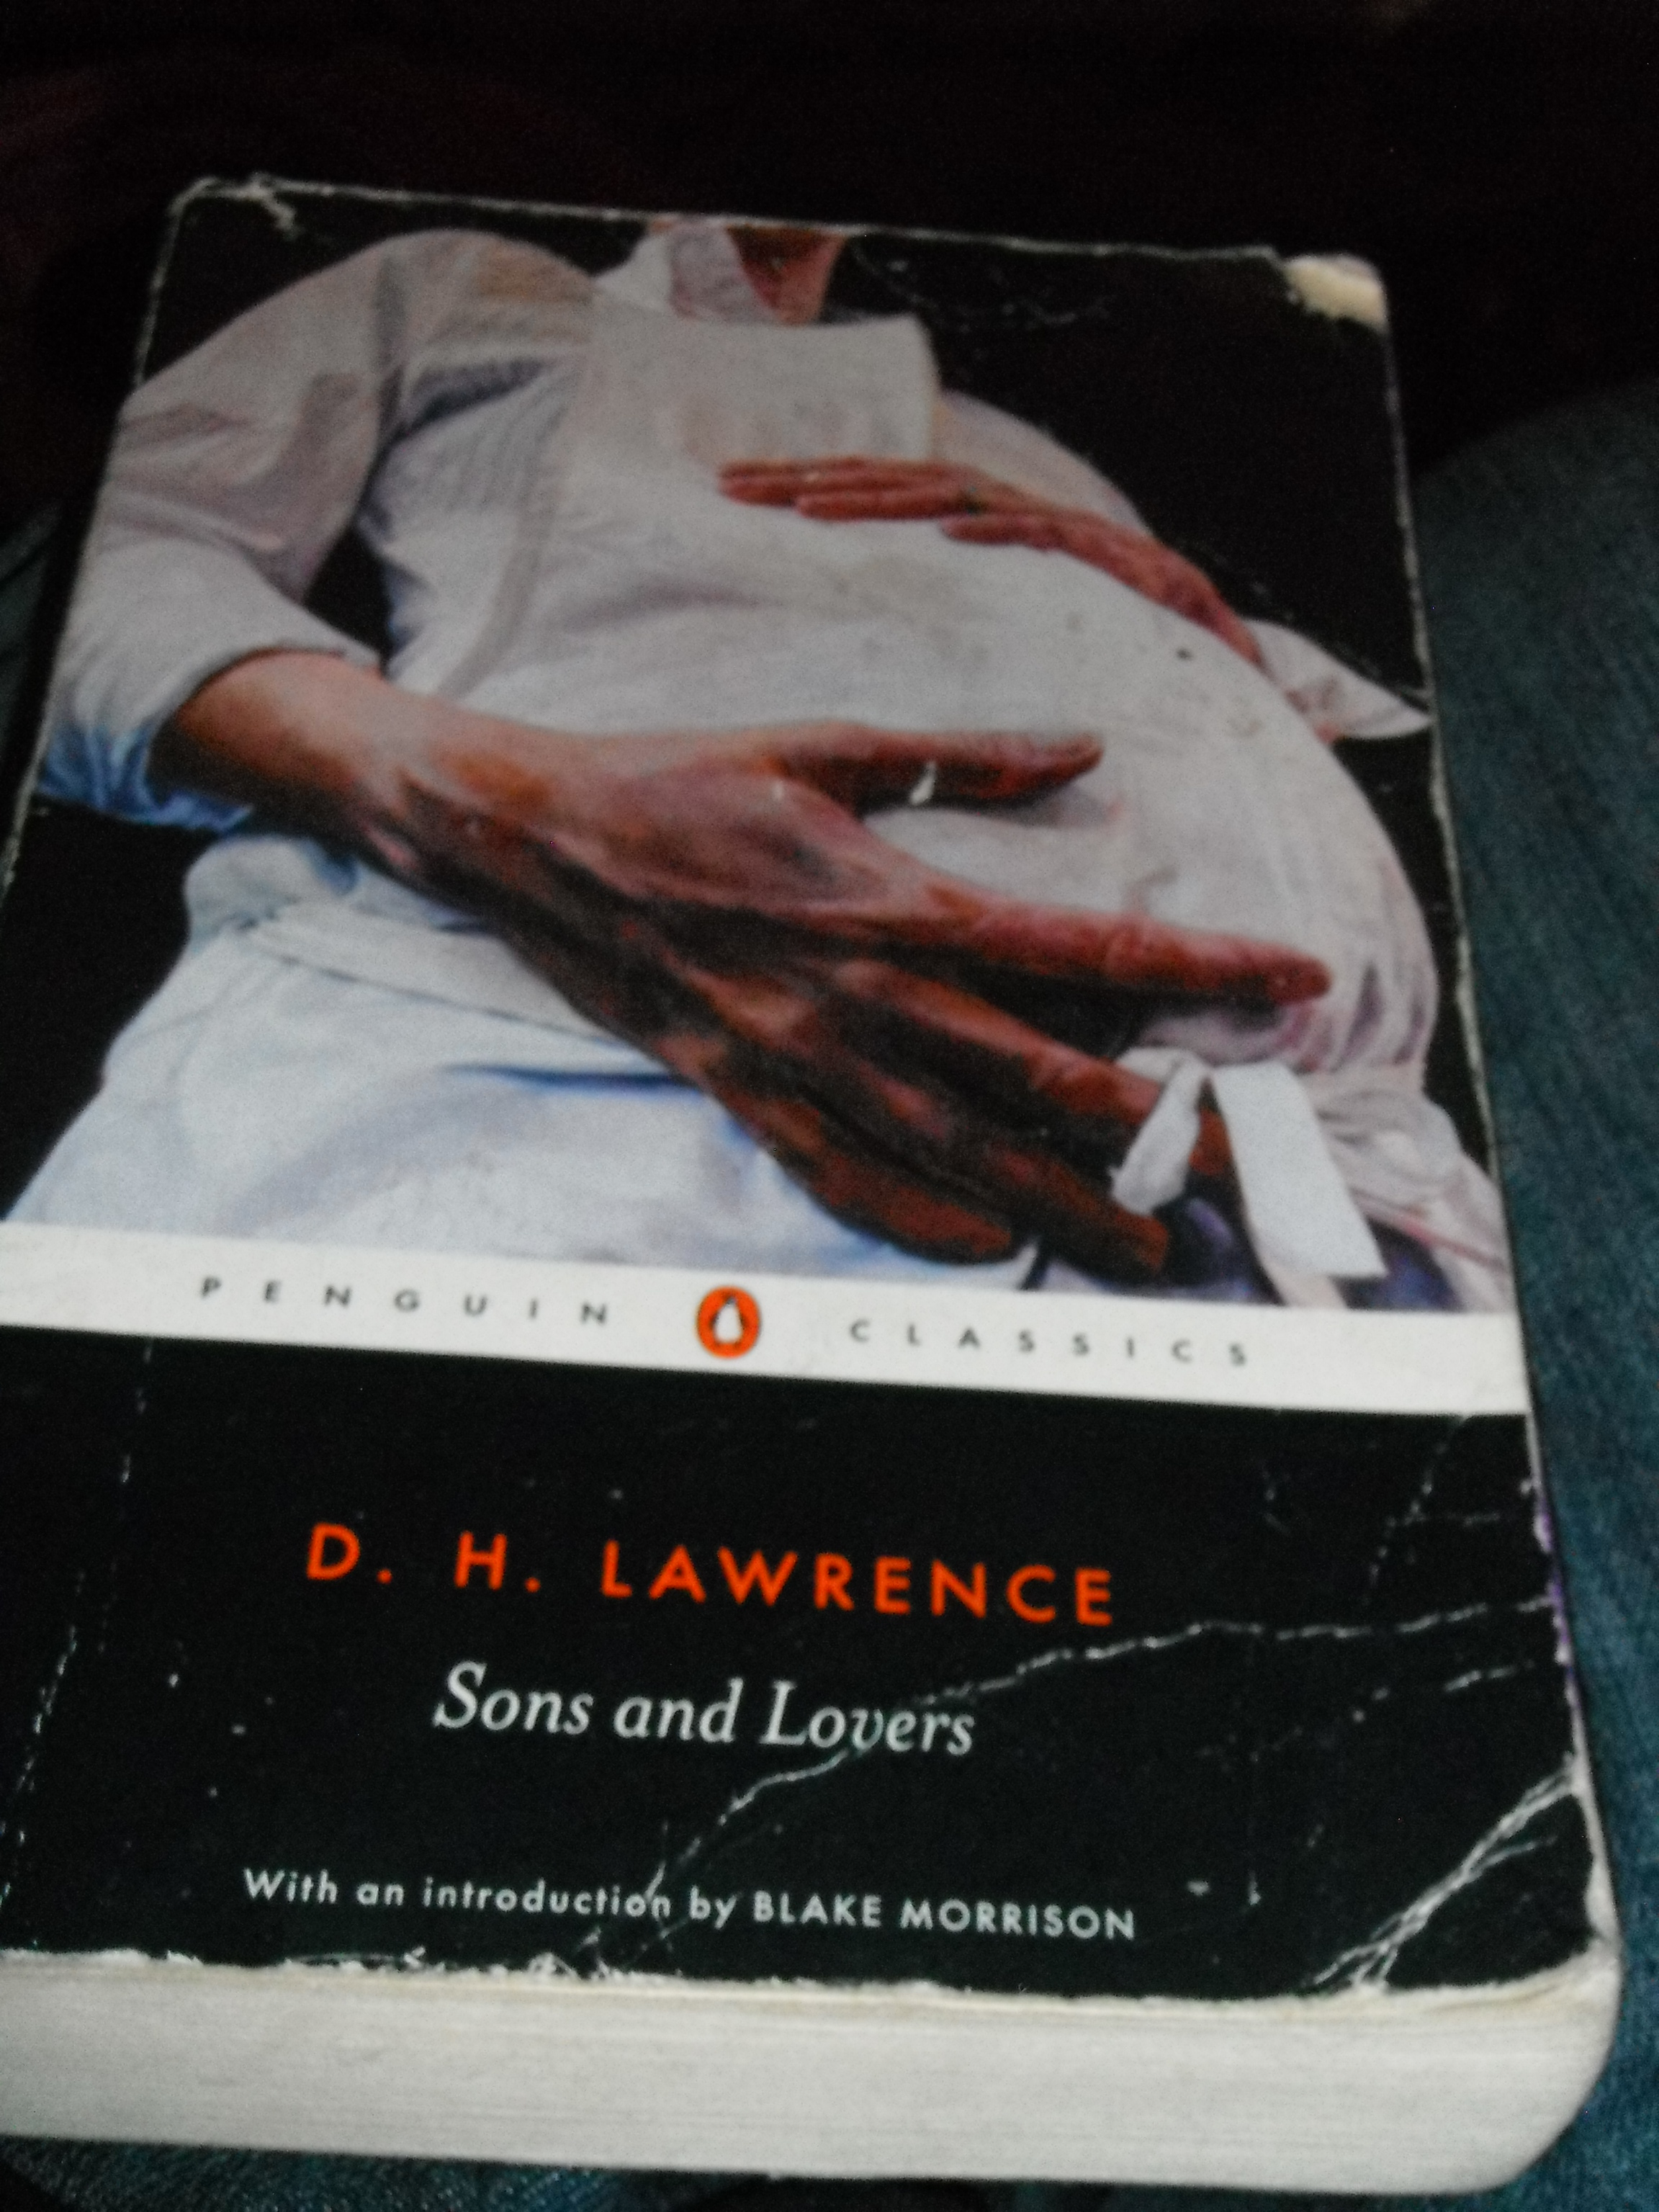 Husbands and Sons by D.H. Lawrence